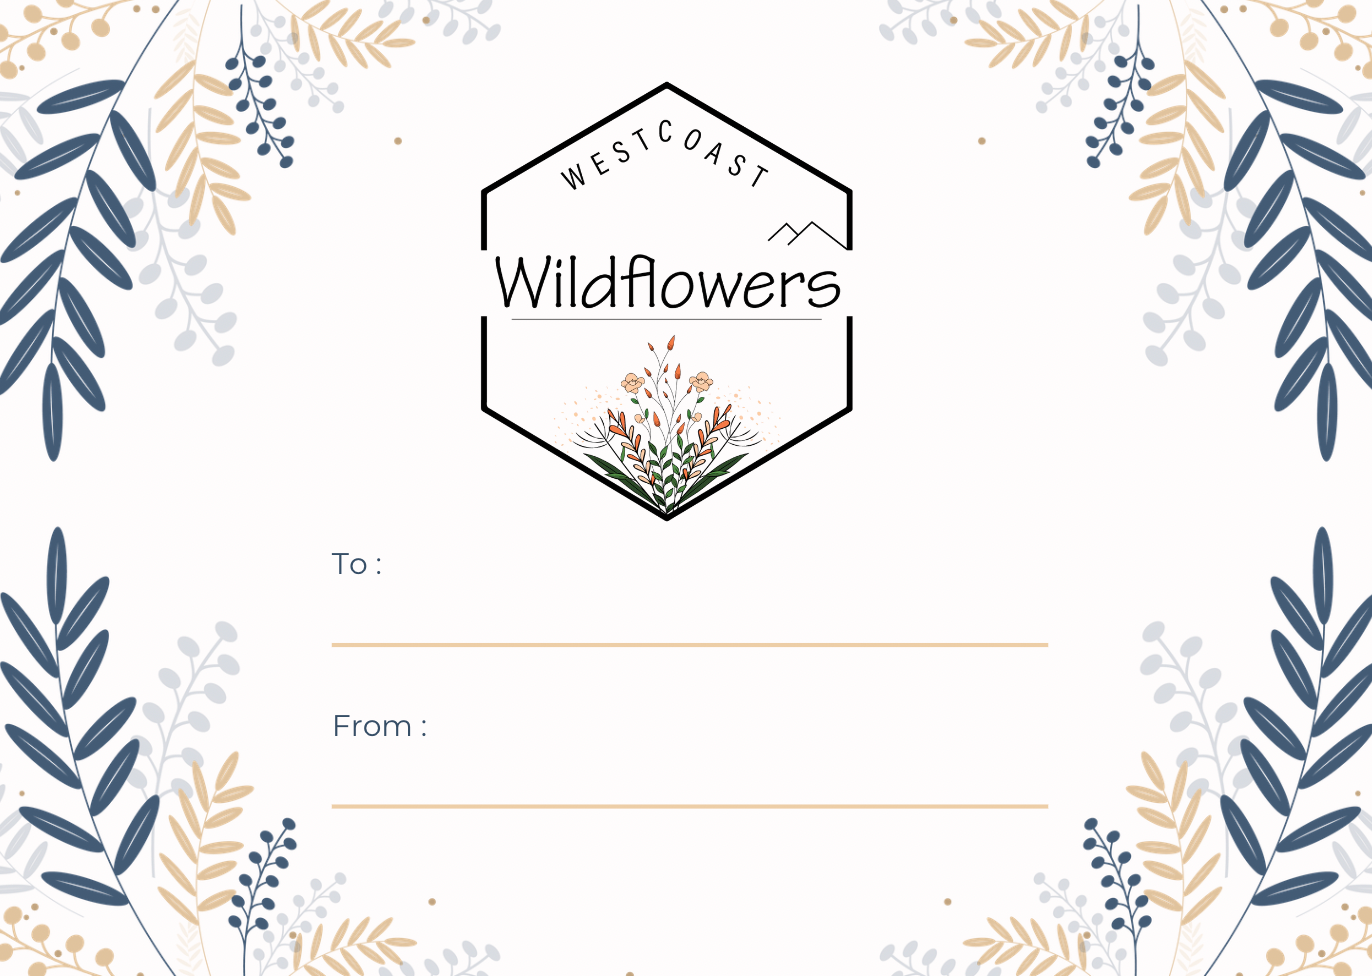 WEST COAST WILDFLOWERS - ONLINE OR IN-STORE GIFT CARD